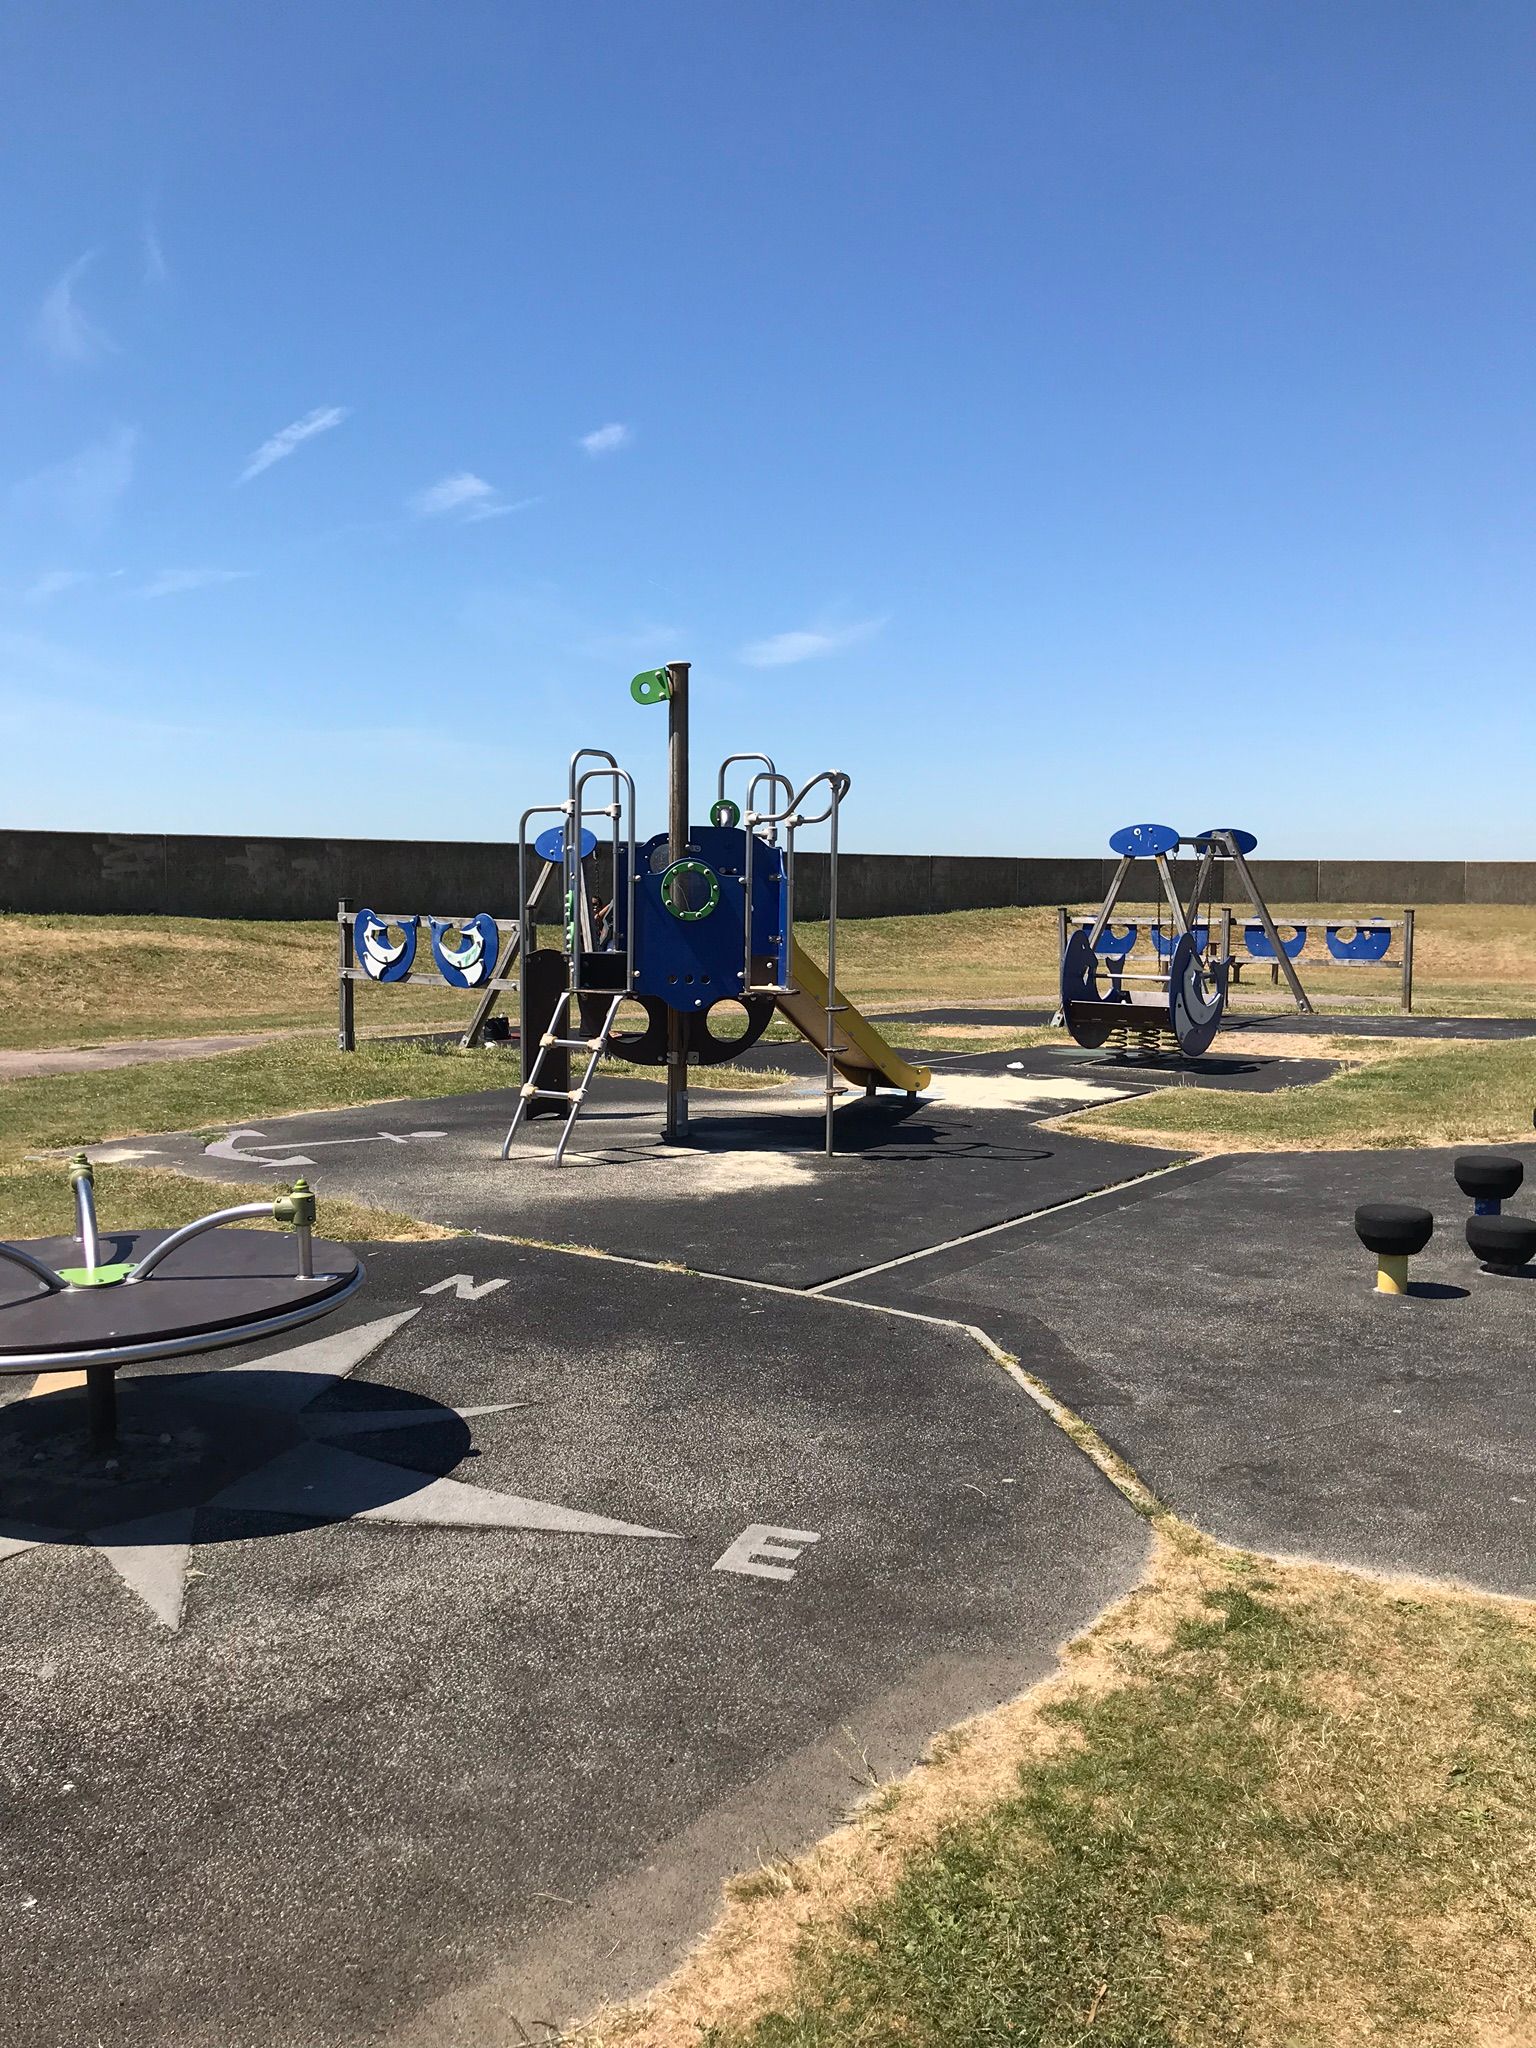 Hampton play area showing teh swings, climbing frame and roundabout